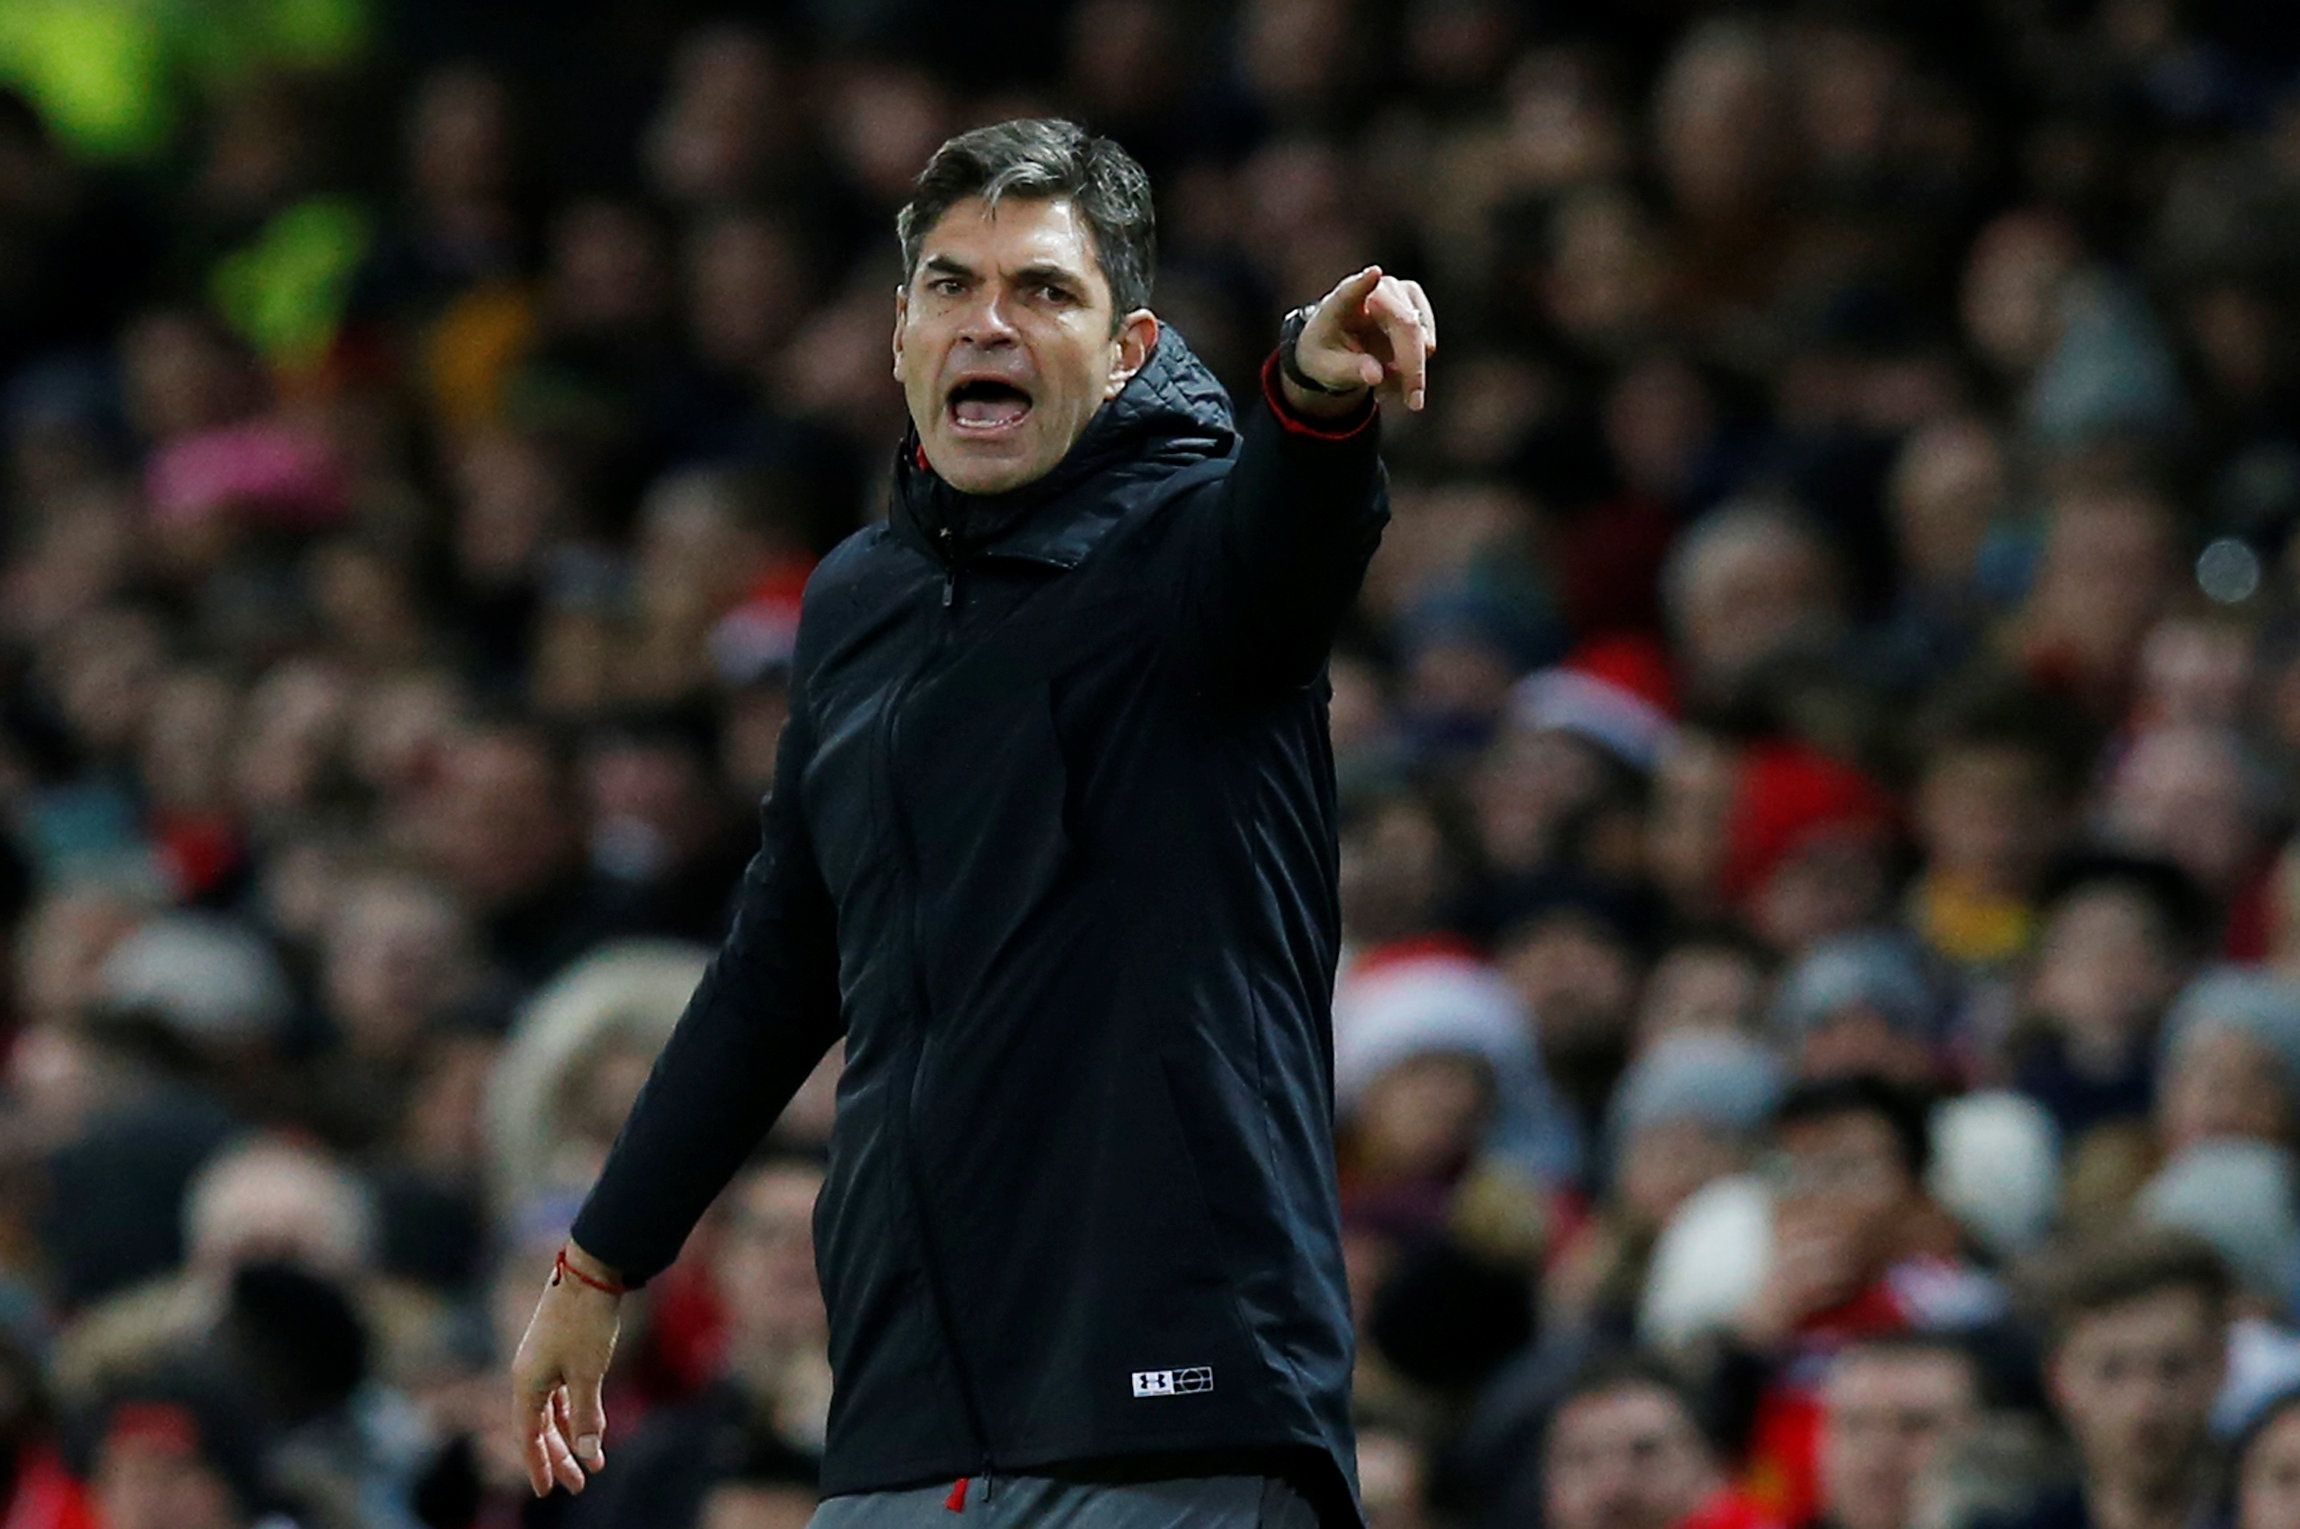 Soccer Football - Premier League - Manchester United vs Southampton - Old Trafford, Manchester, Britain - December 30, 2017   Southampton manager Mauricio Pellegrino                 REUTERS/Andrew Yates    EDITORIAL USE ONLY. No use with unauthorized audio, video, data, fixture lists, club/league logos or 